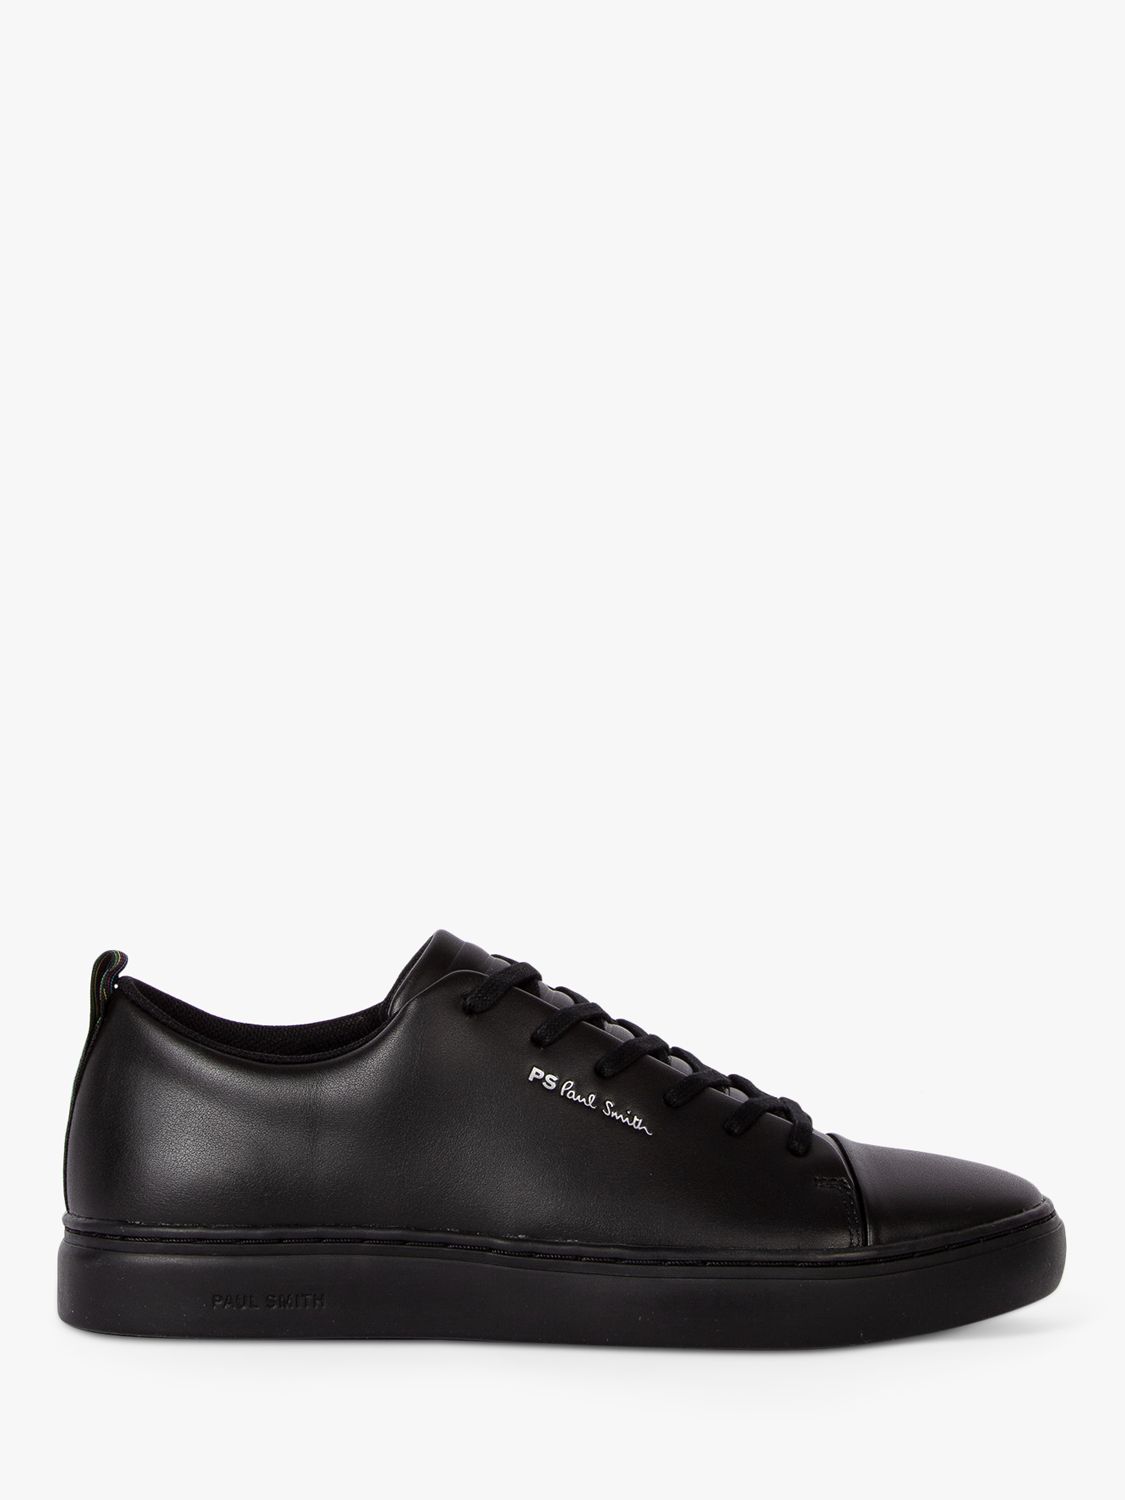 Paul Smith Lee Cupsole Trainers, Black at John Lewis & Partners